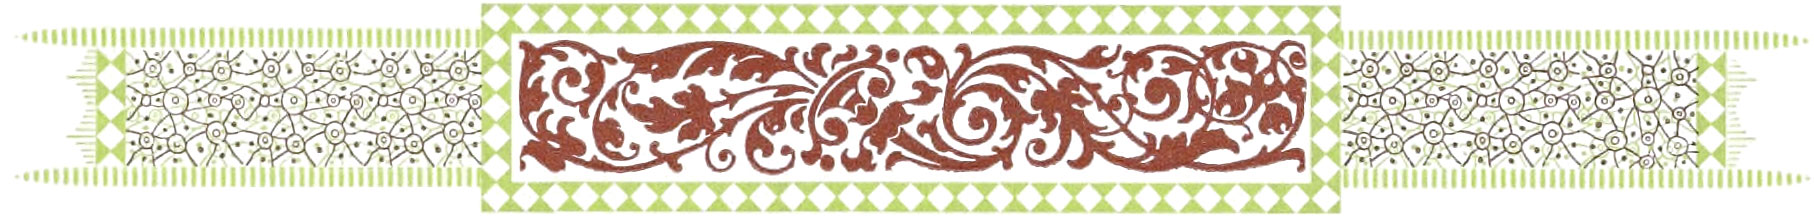 Ornate border comprising reddish-brown and light green colors